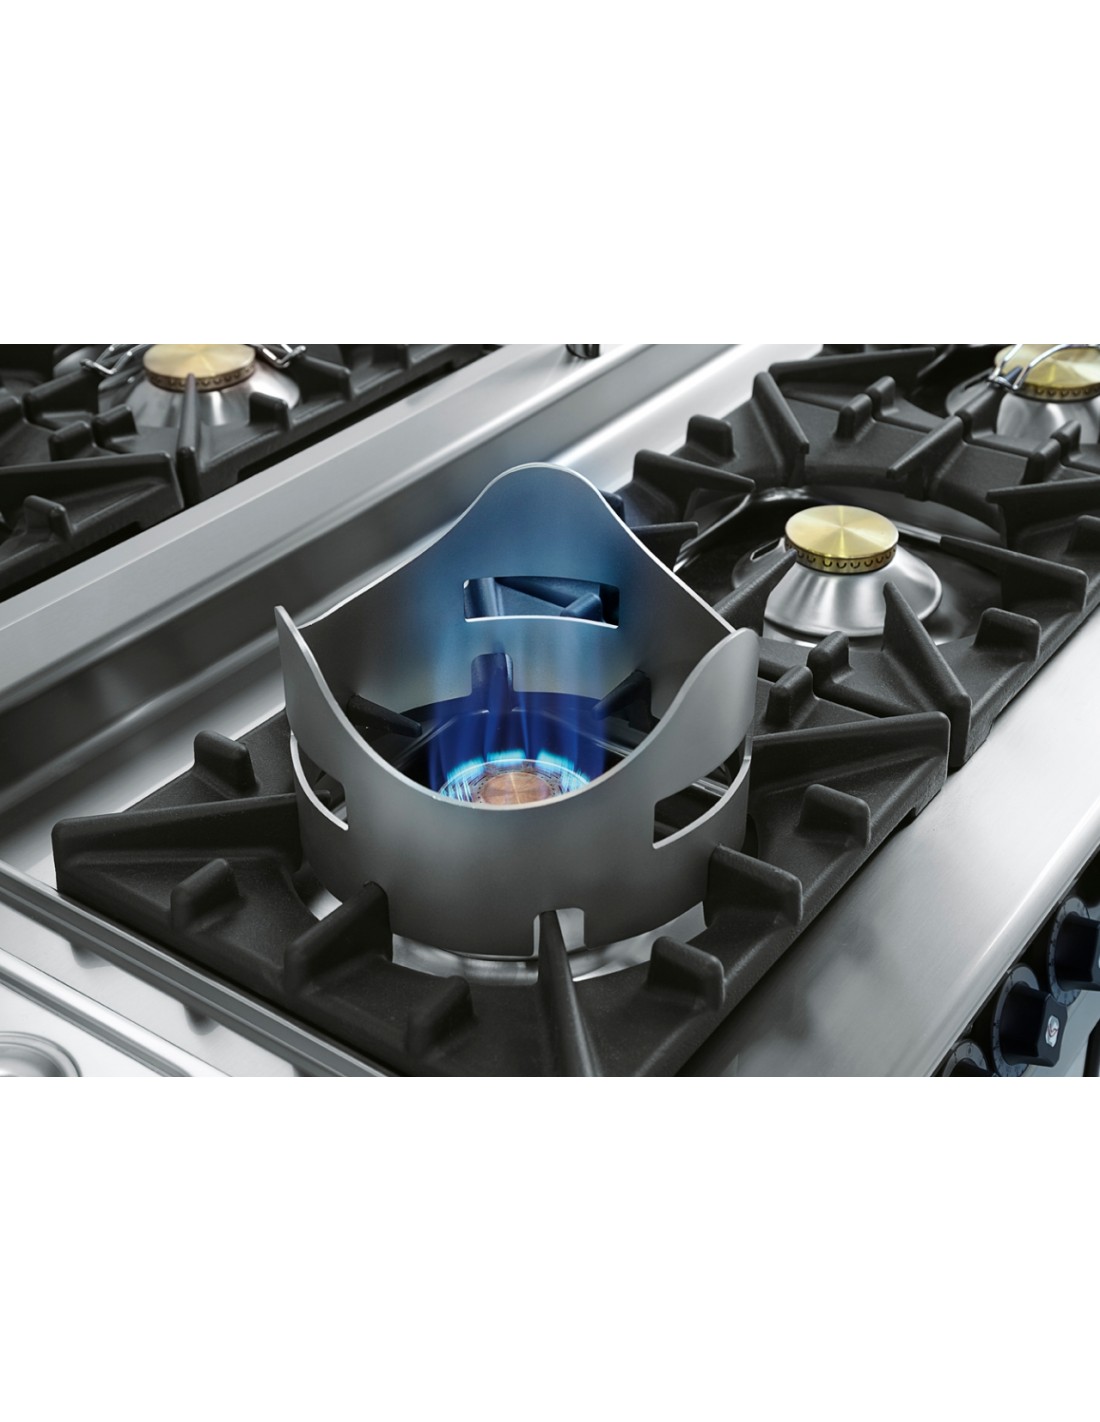 Wok Kit - Vertical Flame - Only on 10 kW burner and cast iron pan supports - Dimensions cm Ø 26 x 16 h